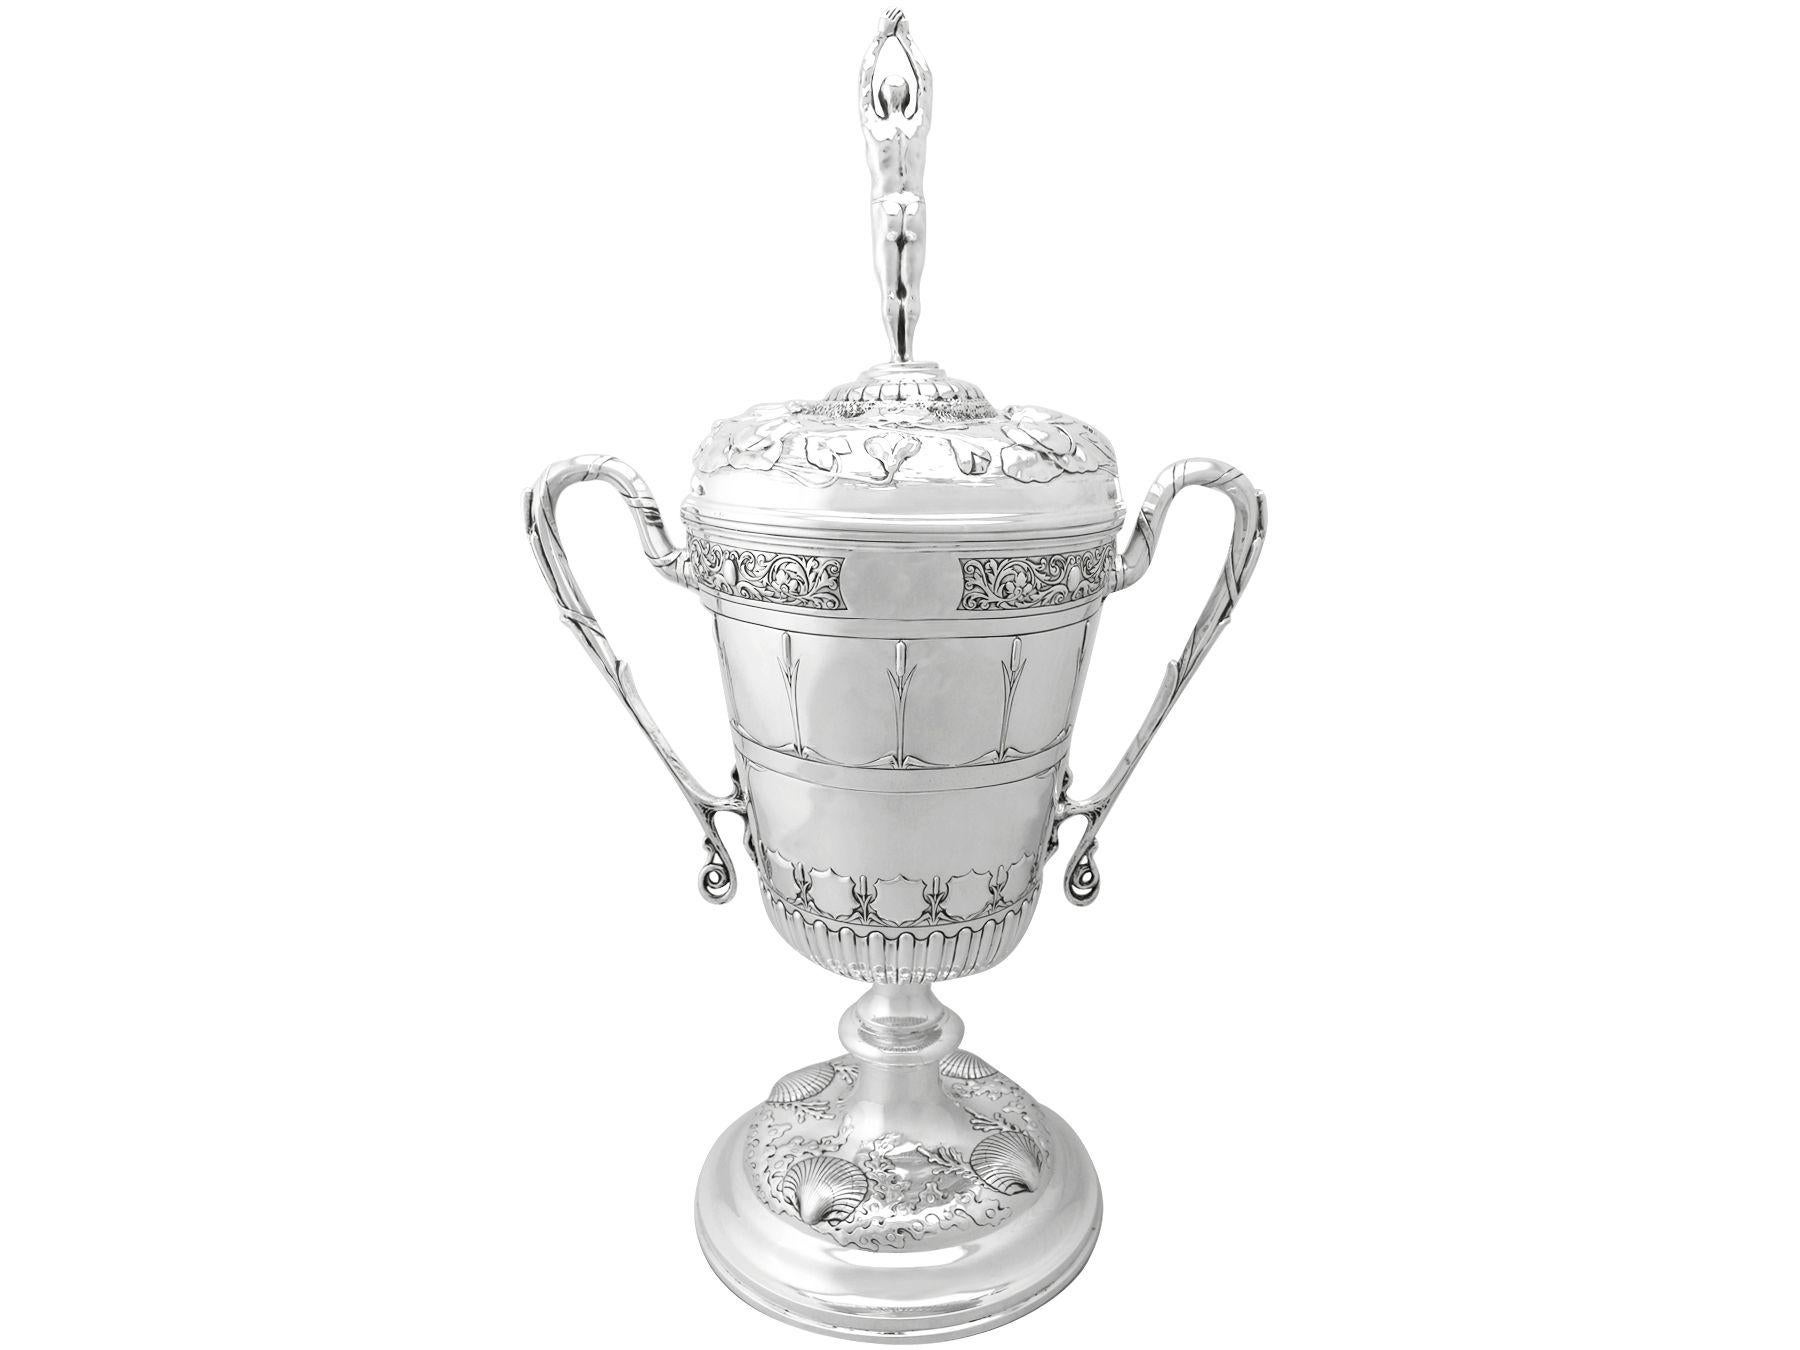 English Antique Edwardian Sterling Silver Presentation or Champagne Cup and Cover For Sale